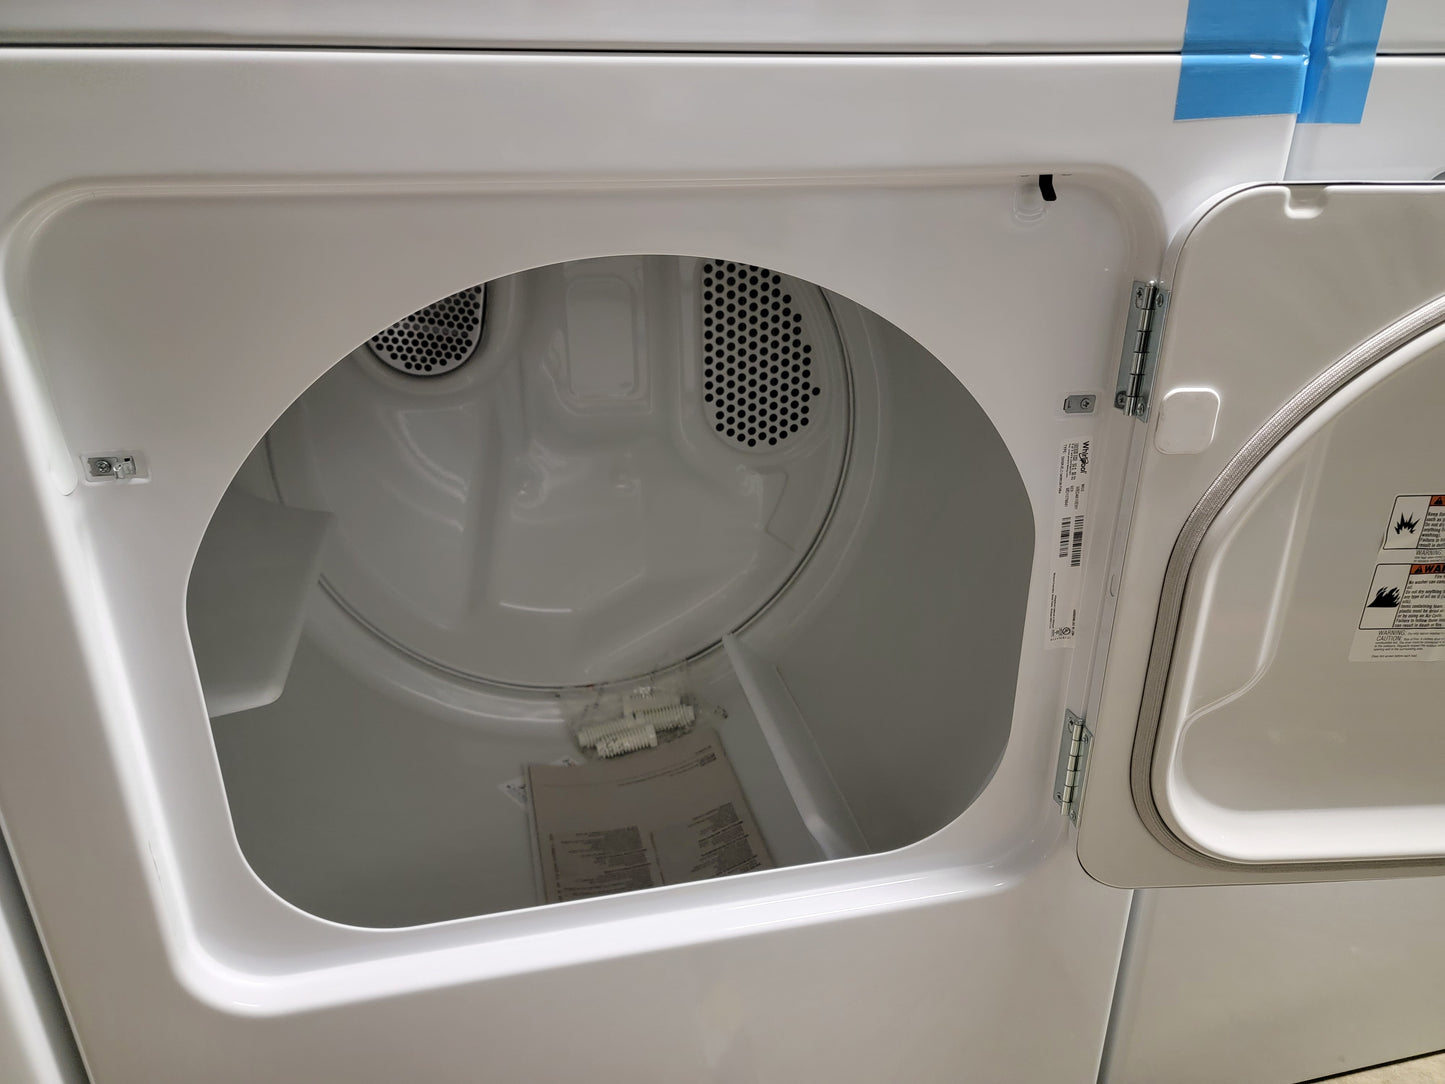 Whirlpool 3.8-3.9 cu ft High Efficiency 2 in 1 Removable Agitator Top-Load Washer & 7 cu ft Heavy-Duty AutoDry Electric Dryer Set (White) - WTW4957PW/WED4815EW